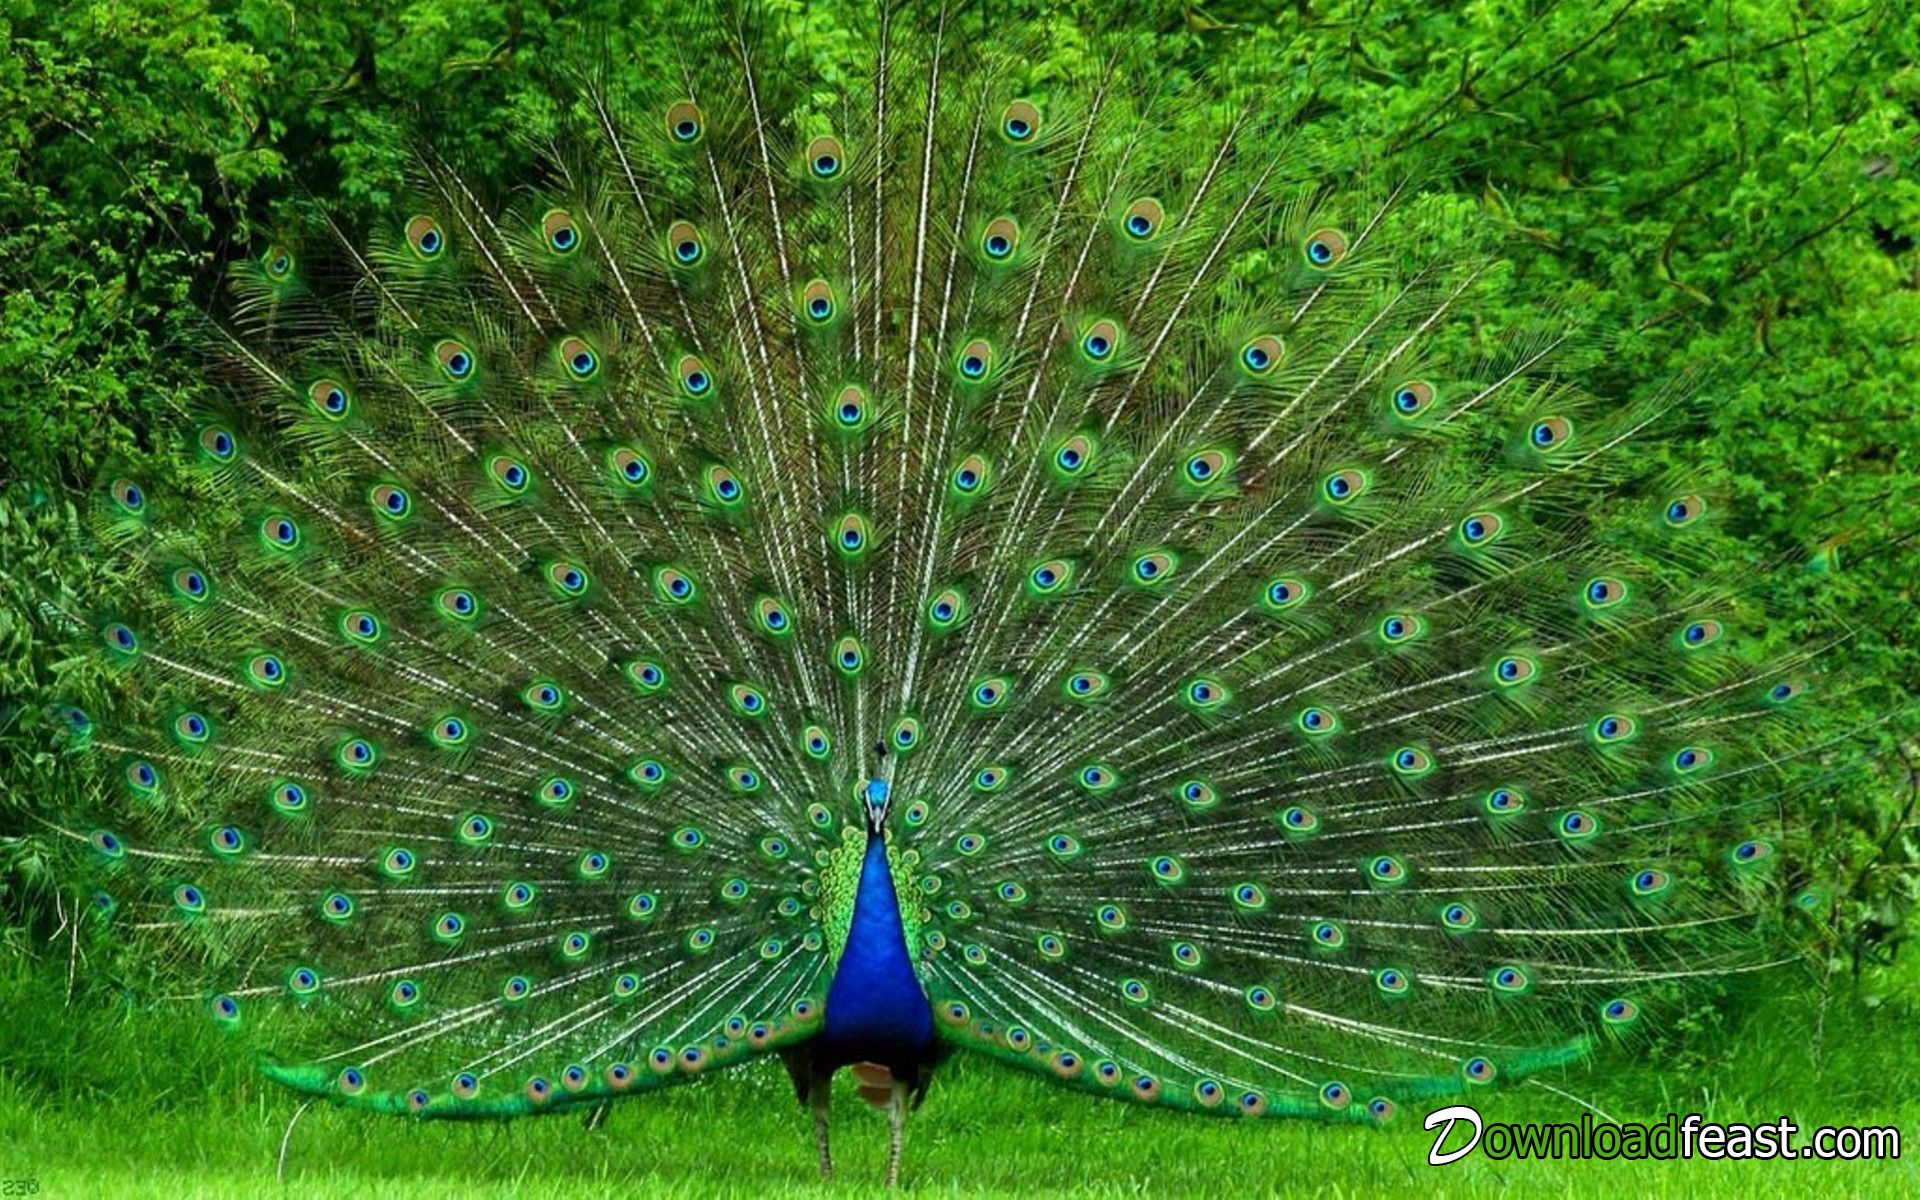 No One Forgets to Like this Beautiful Peacock - Downloadfeast